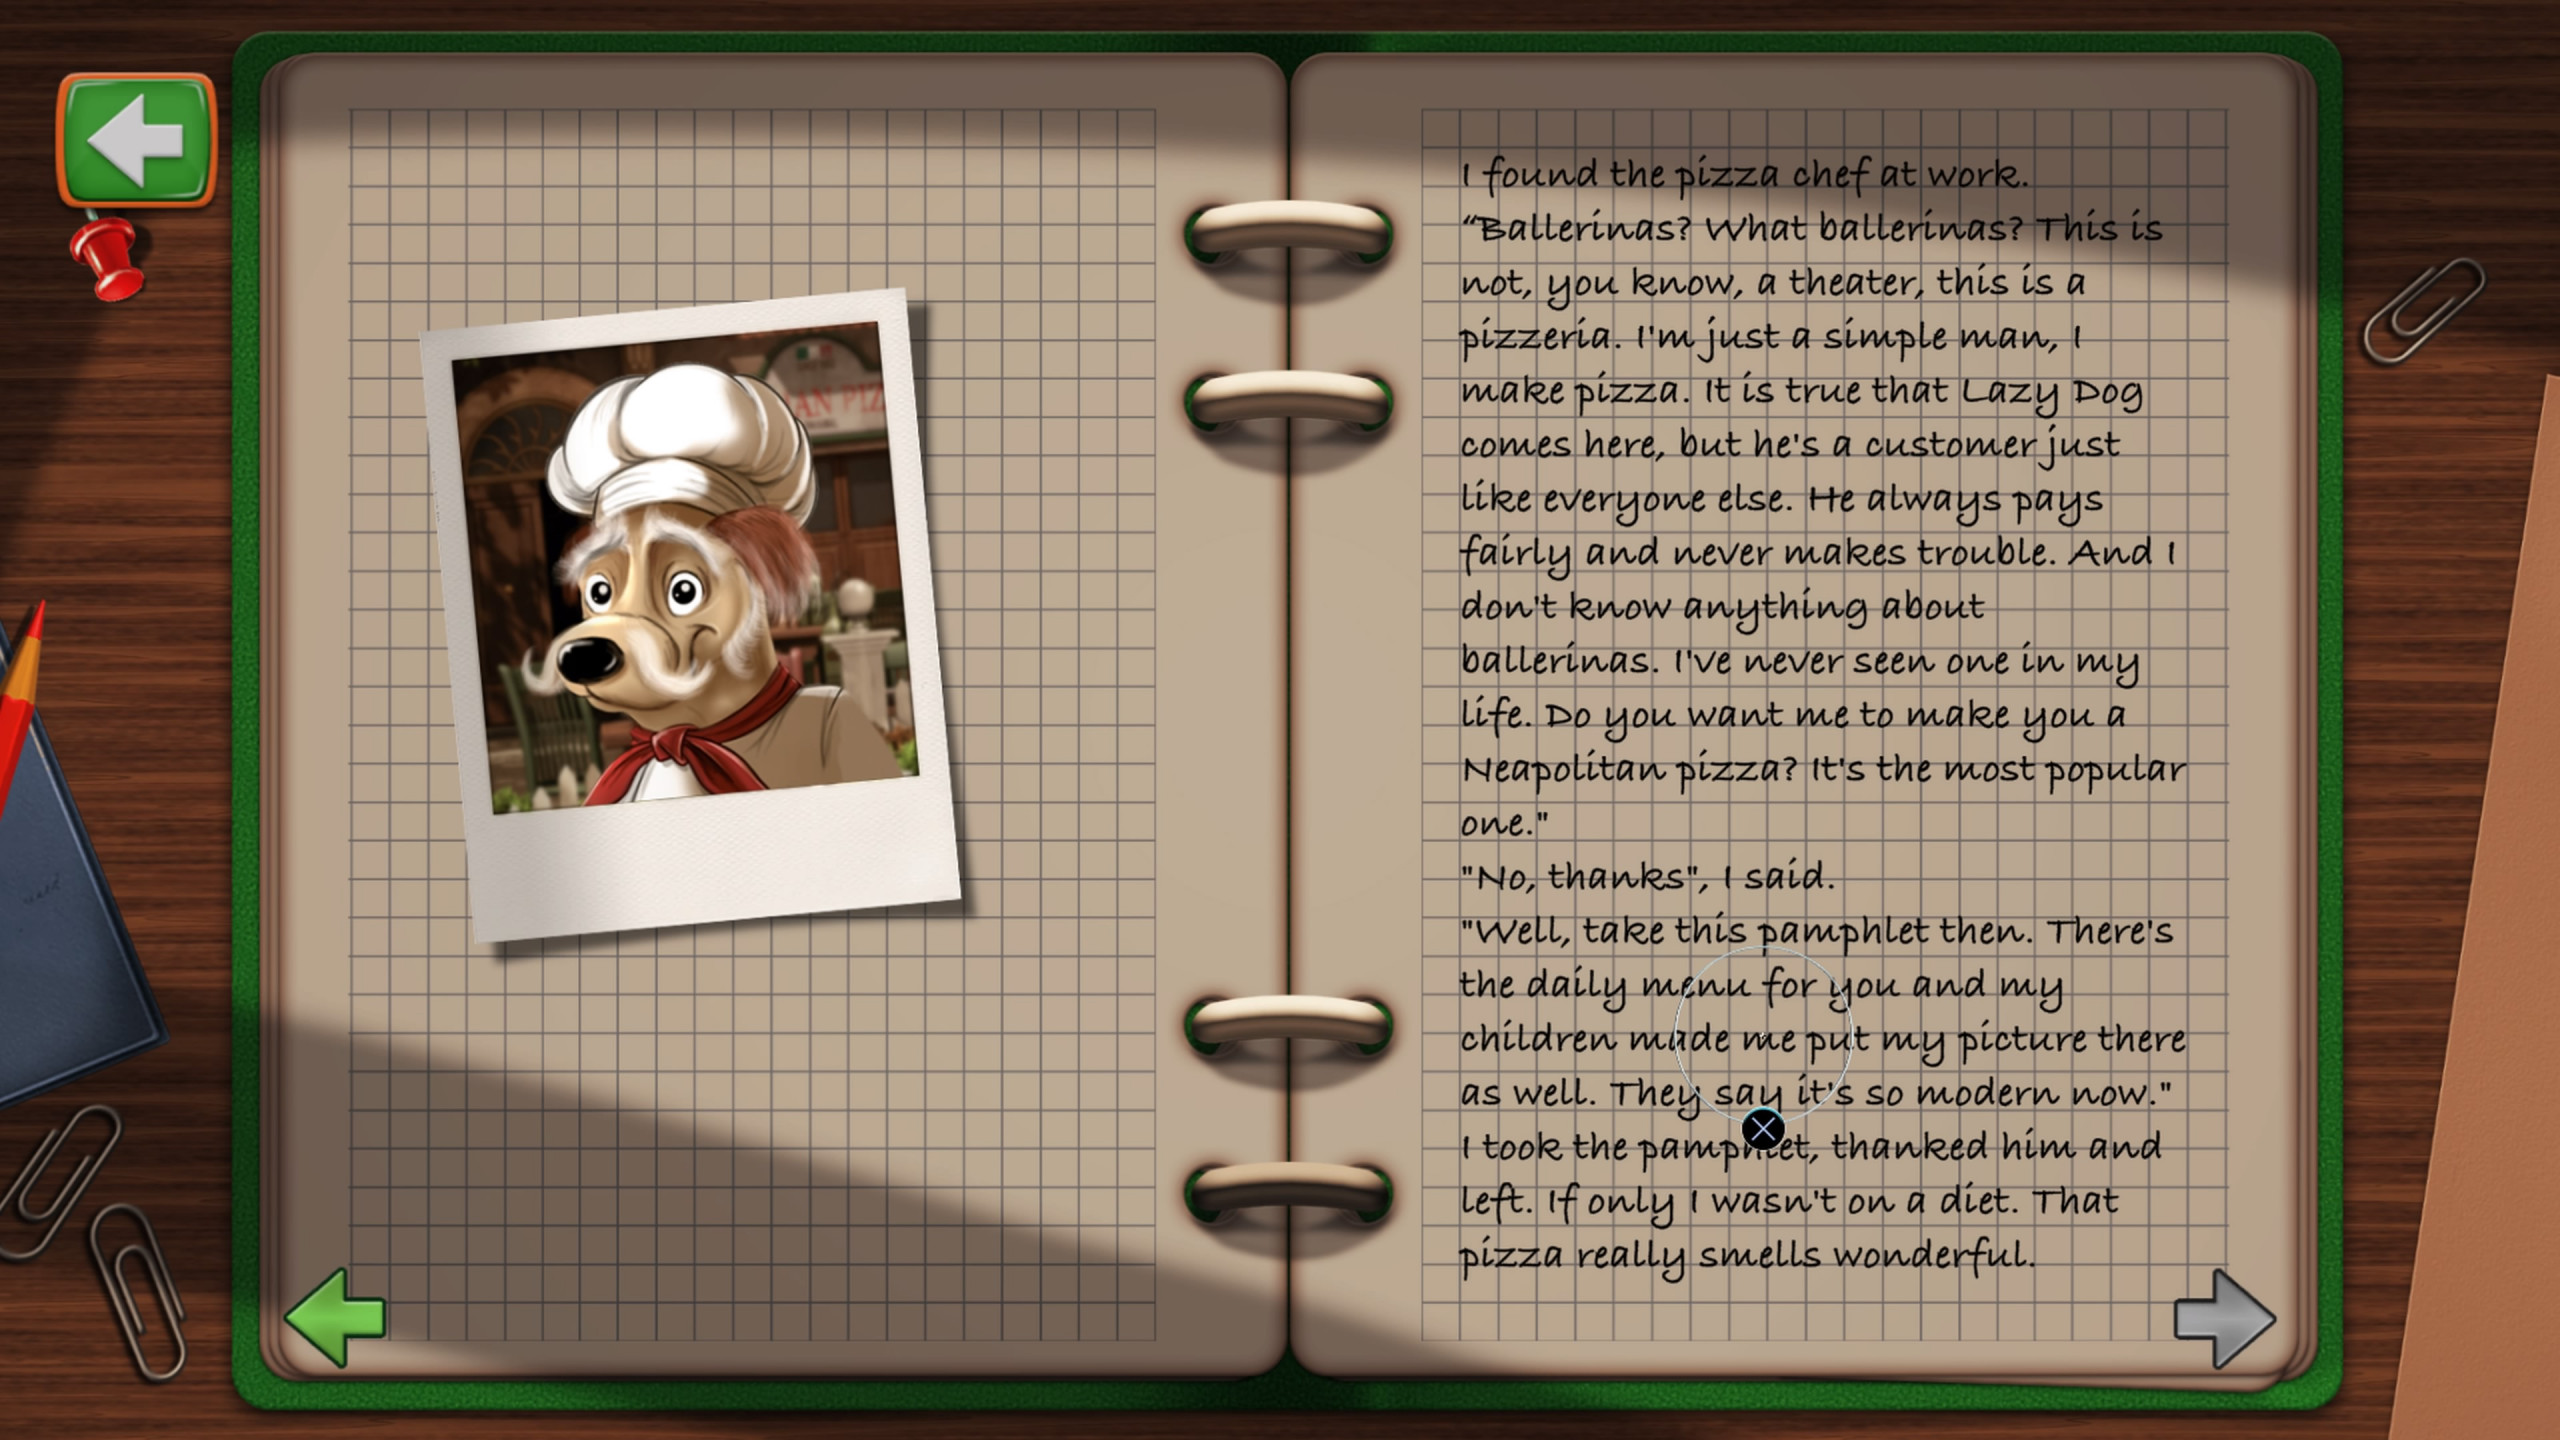 A notebook with a photograph and wall of texting explaining the scene and dialogue of the game.